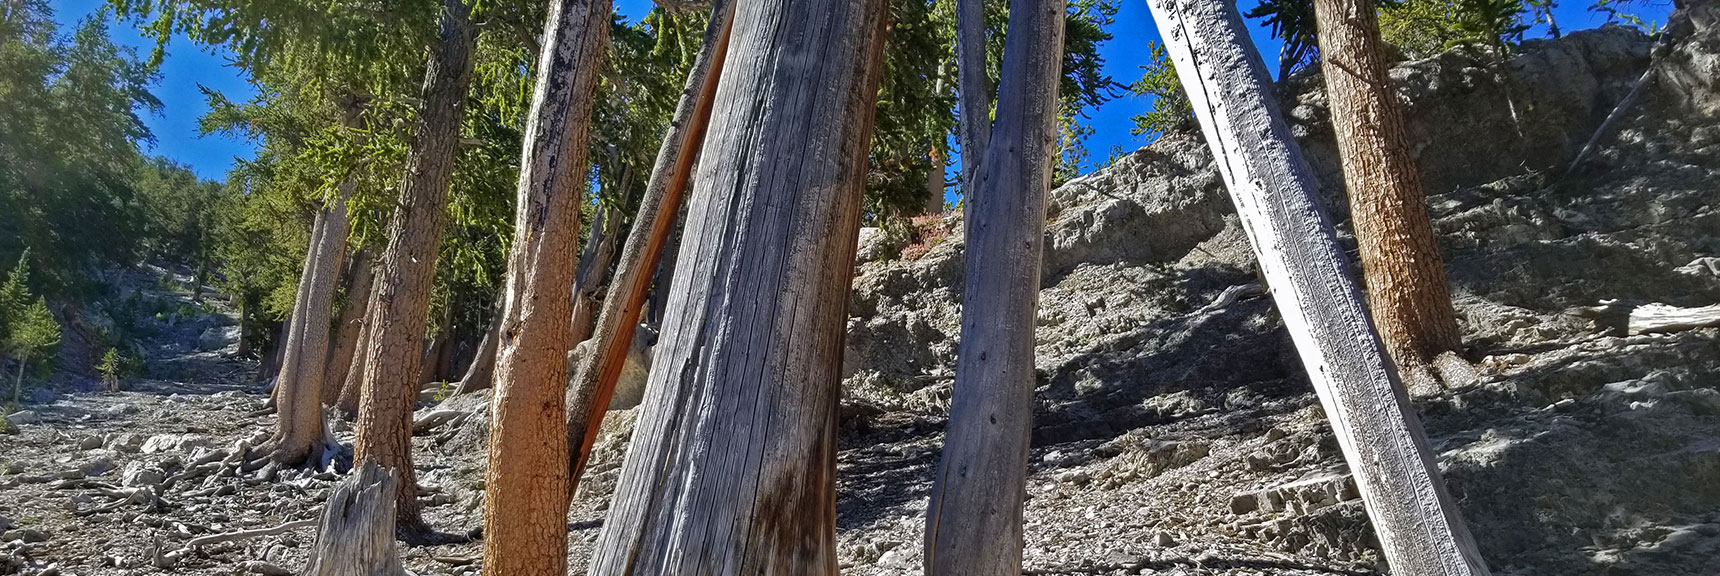 Cliffs and Rocks Begin to Taper Off Above | Lee to Kyle Canyon | Foxtail Approach | Mt Charleston Wilderness | Spring Mountains, Nevada